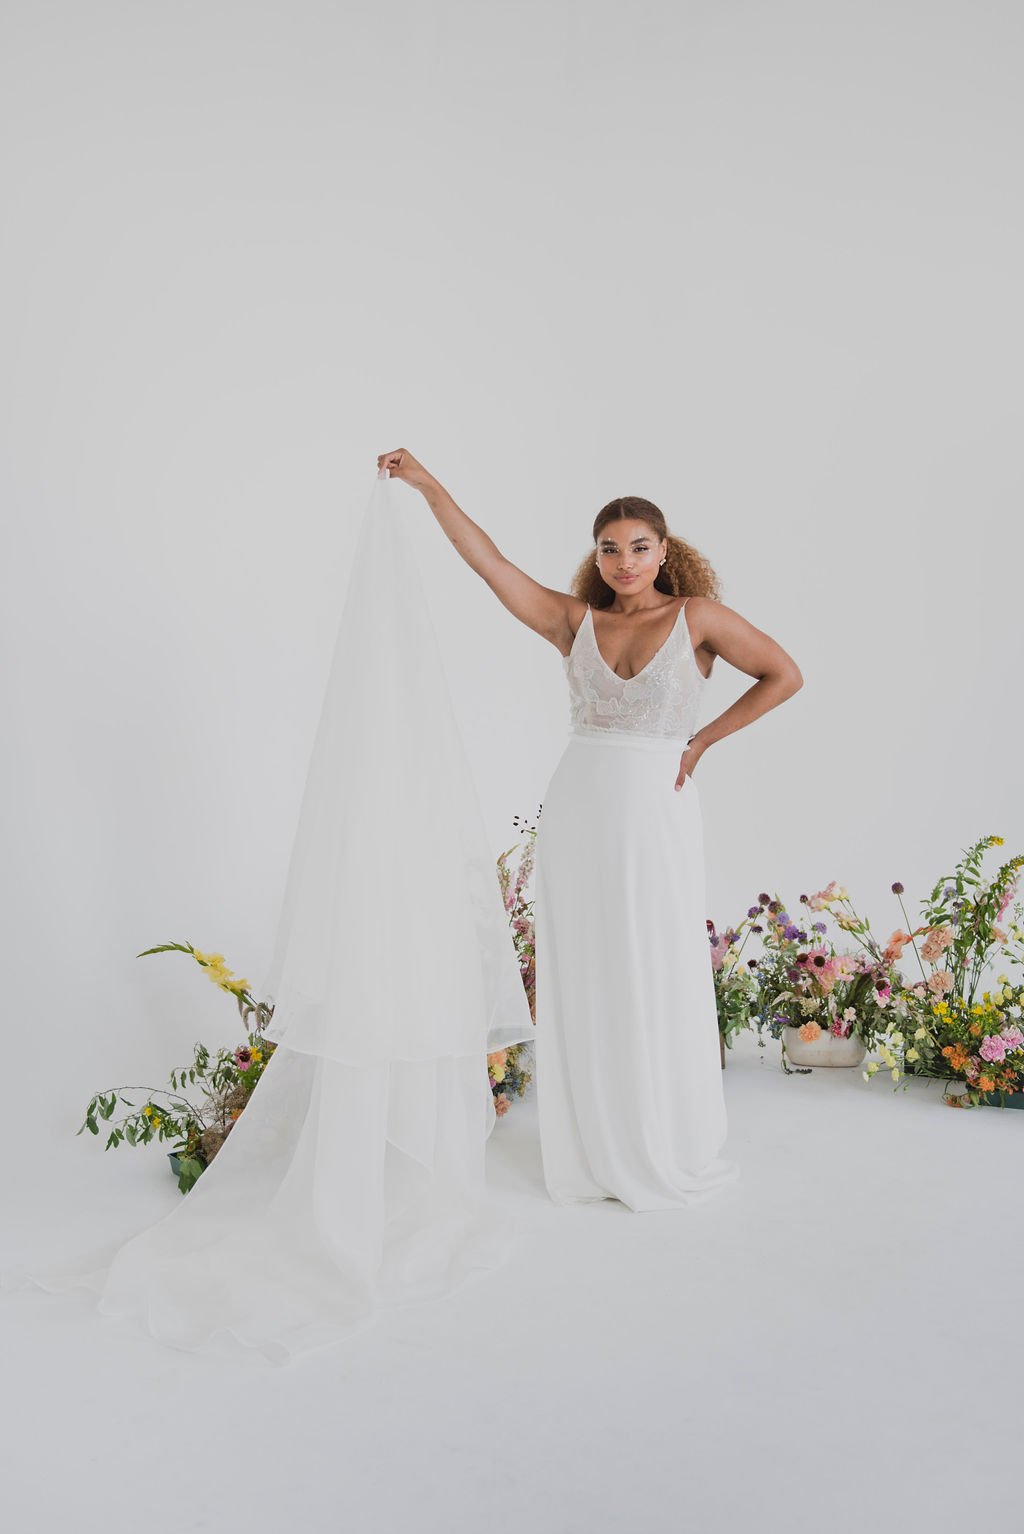 Shop Bridal Capes + Overskirts for Your Wedding Dress Online